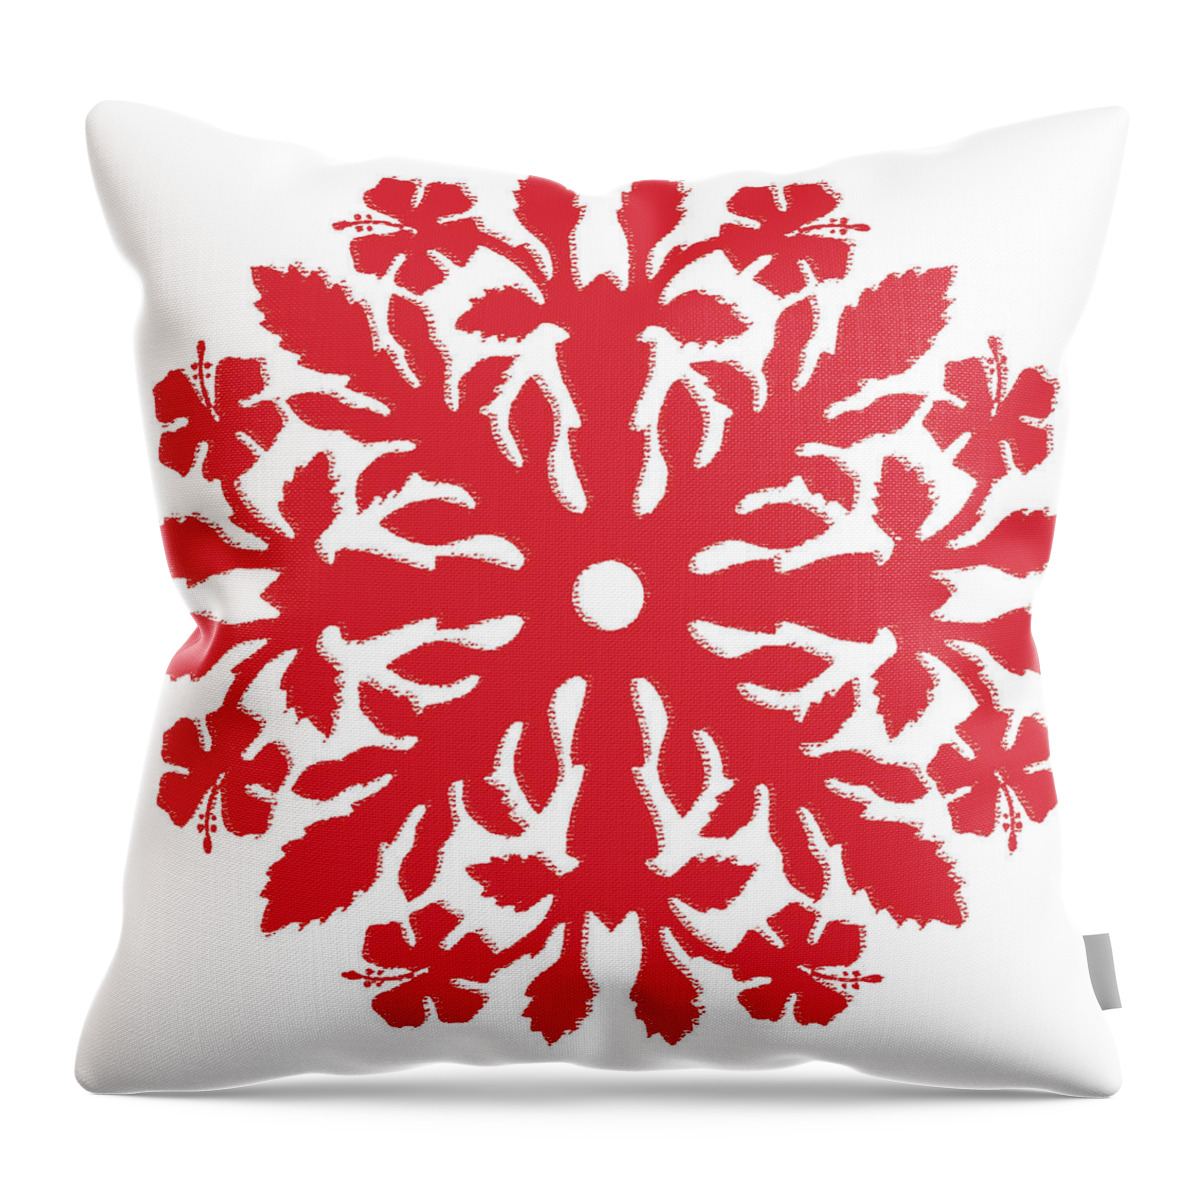 Hawaii Iphone Cases Throw Pillow featuring the digital art Red Hibiscus by James Temple